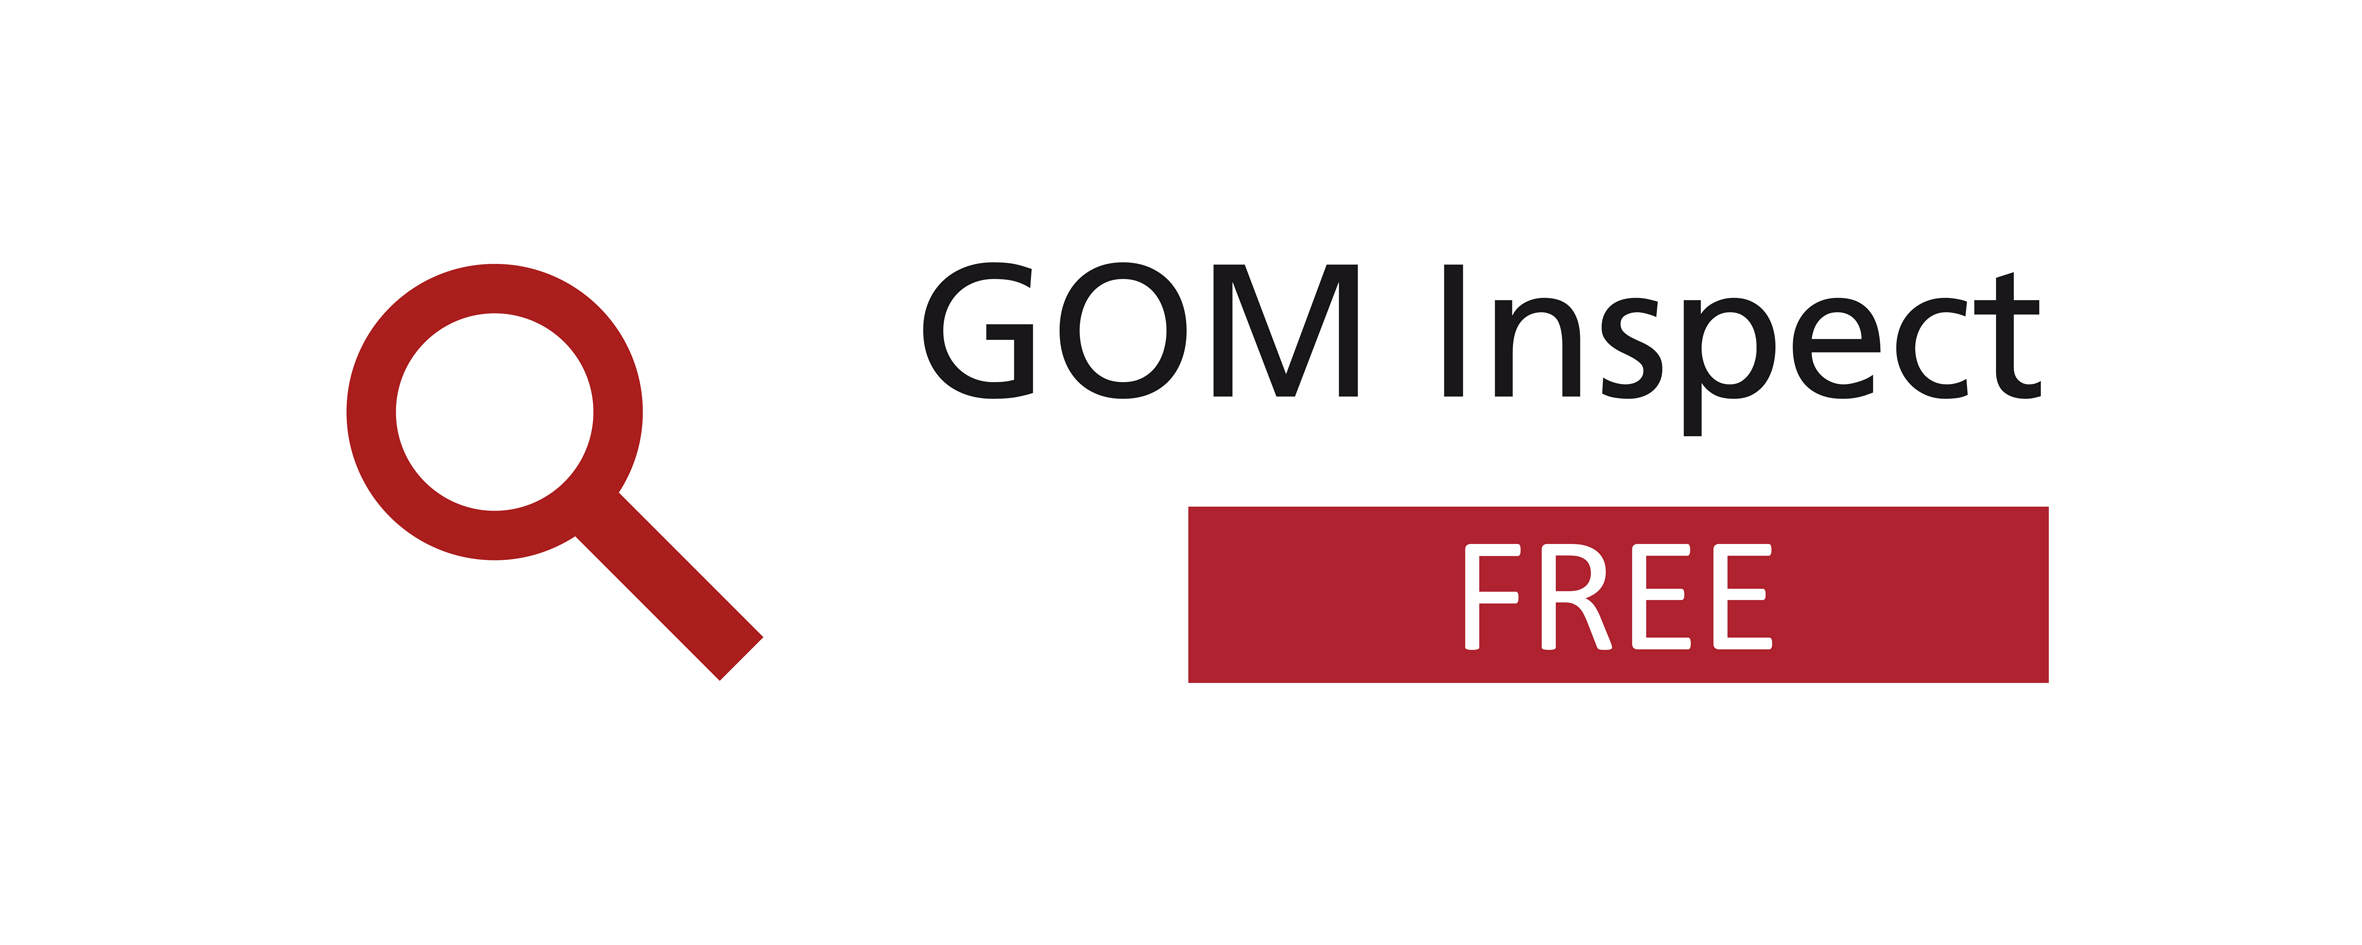 GOM Inspect - Free 3D Inspection Software